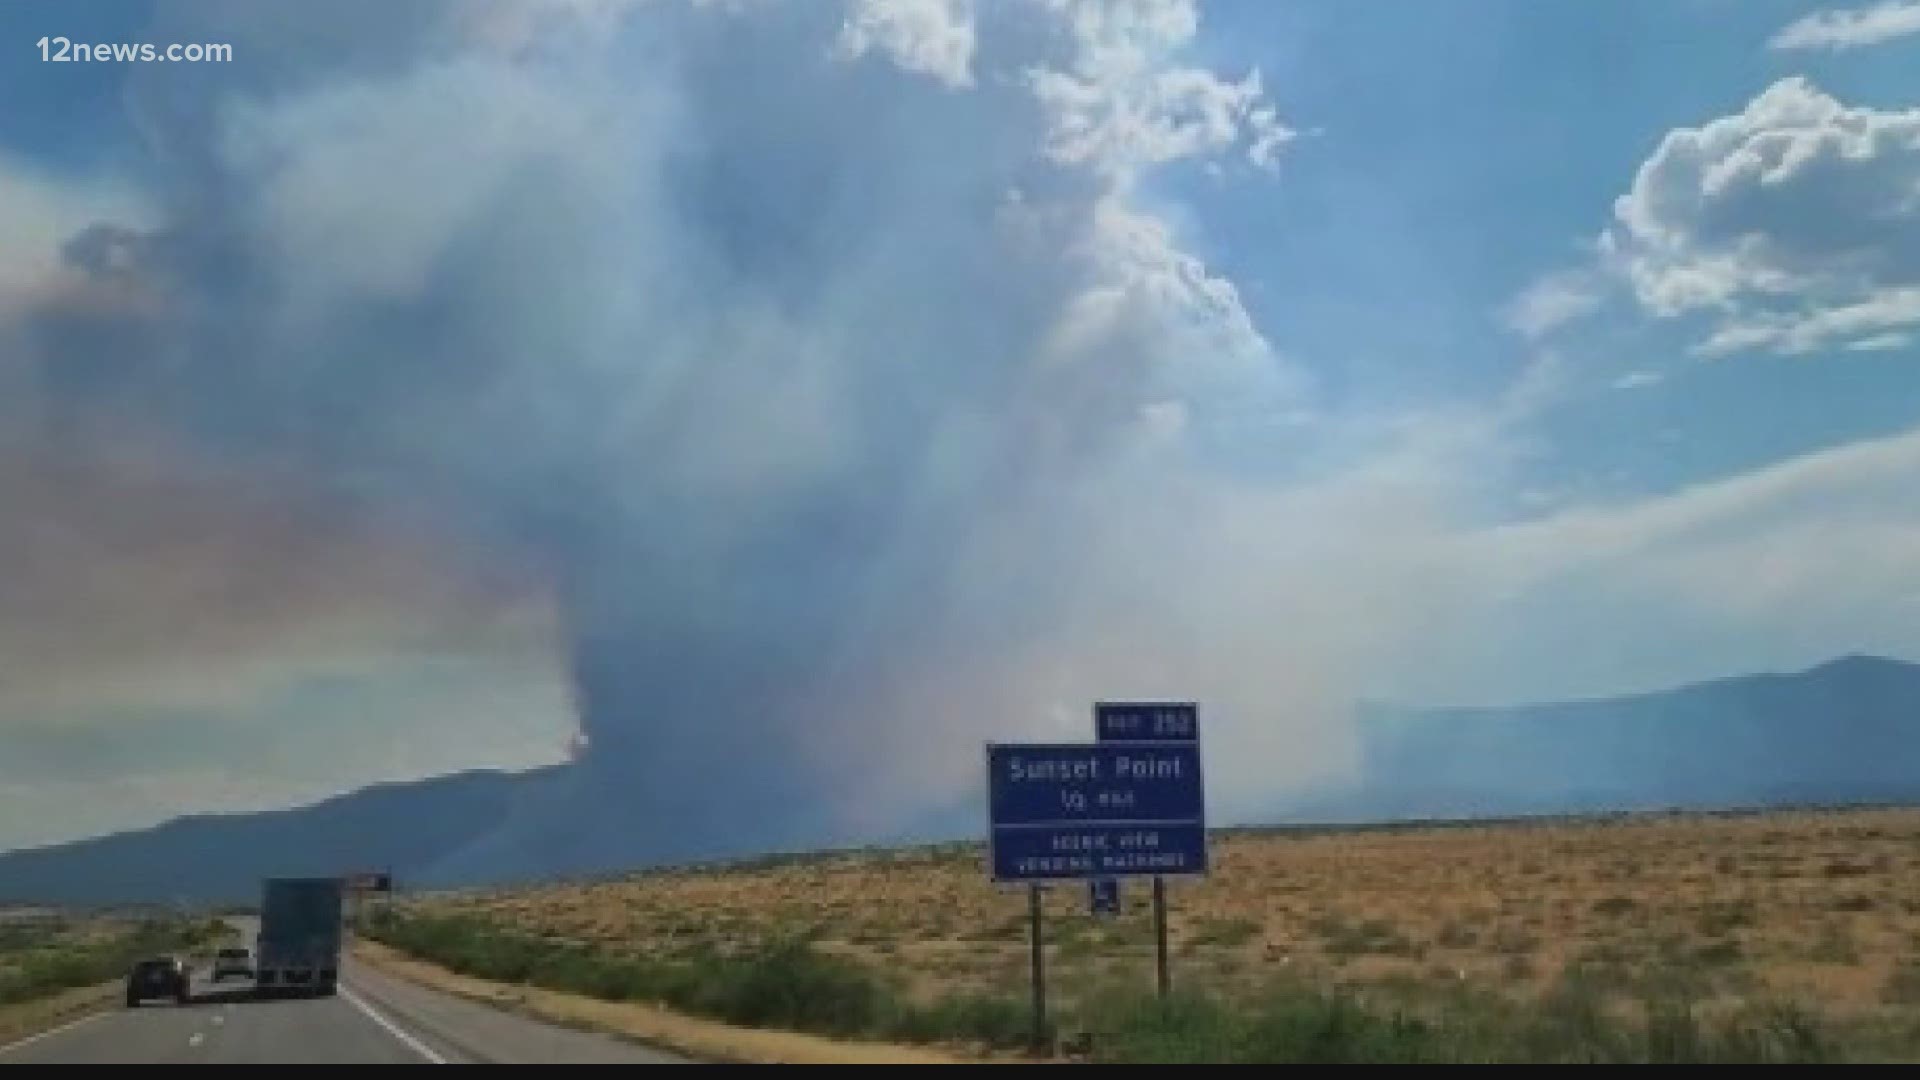 Several wildfires continue to burn across Arizona. Here's the latest update for July 2, 2021.